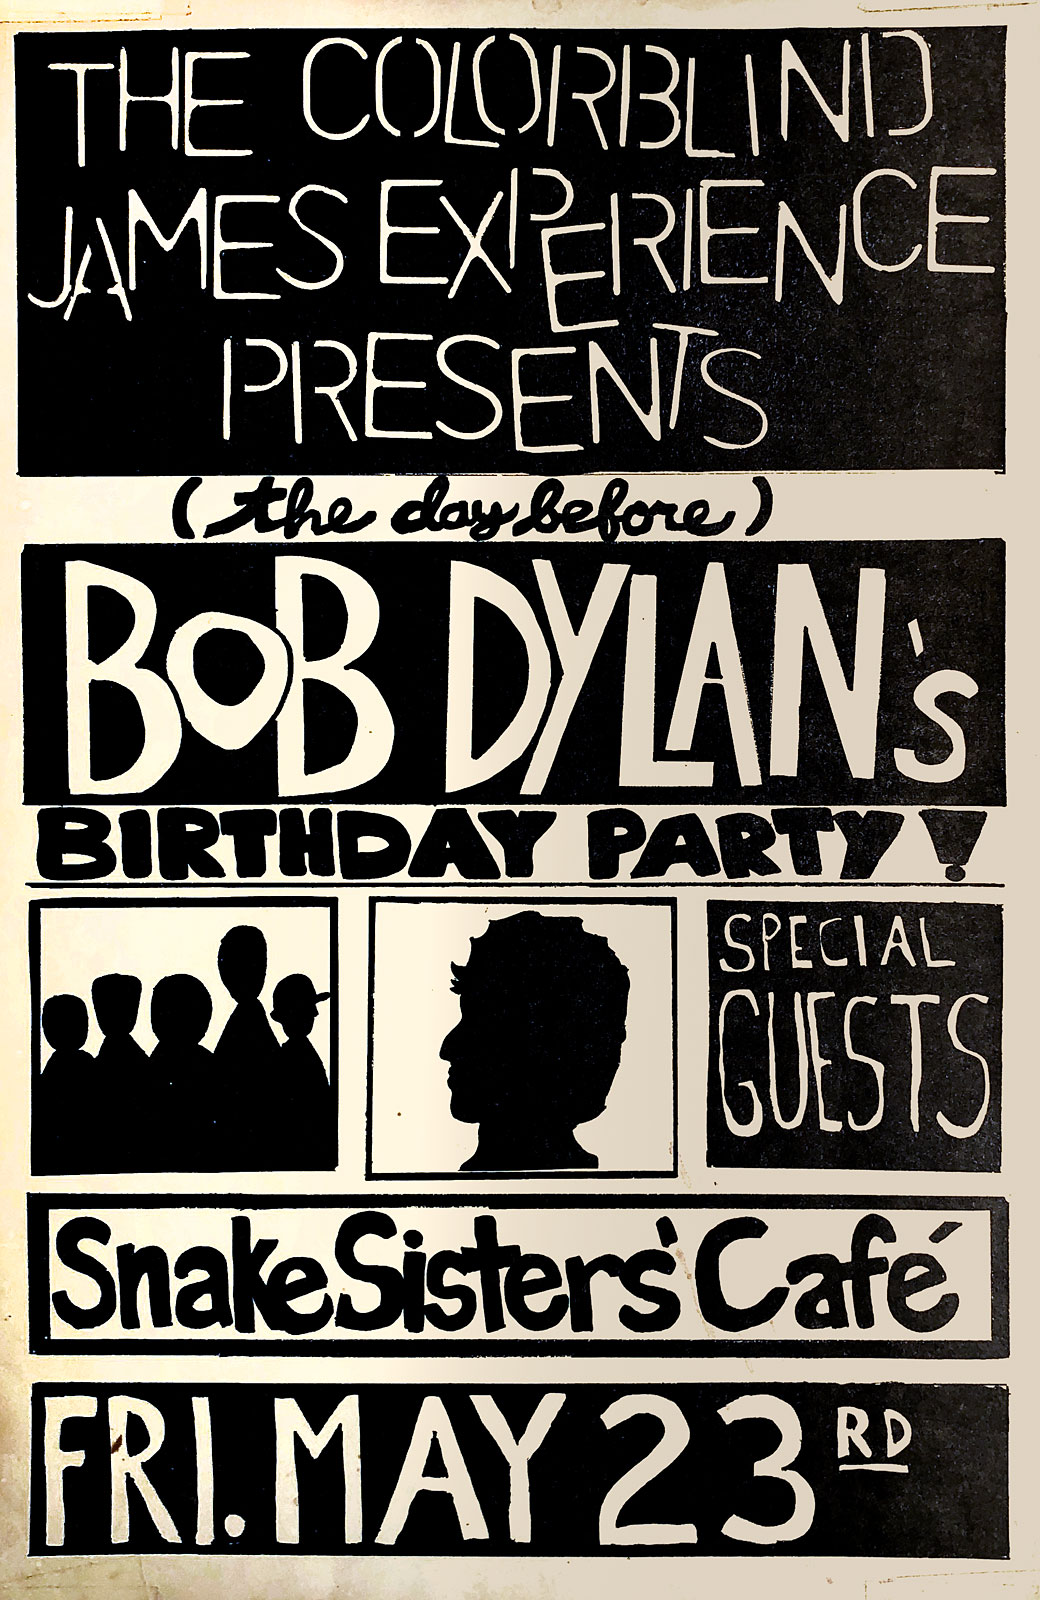 Poster by Chuck Cuminale for Colorblind James Experience Presents (the day before) Bob Dylan's Birthday Party with special guests, 05.23.1986